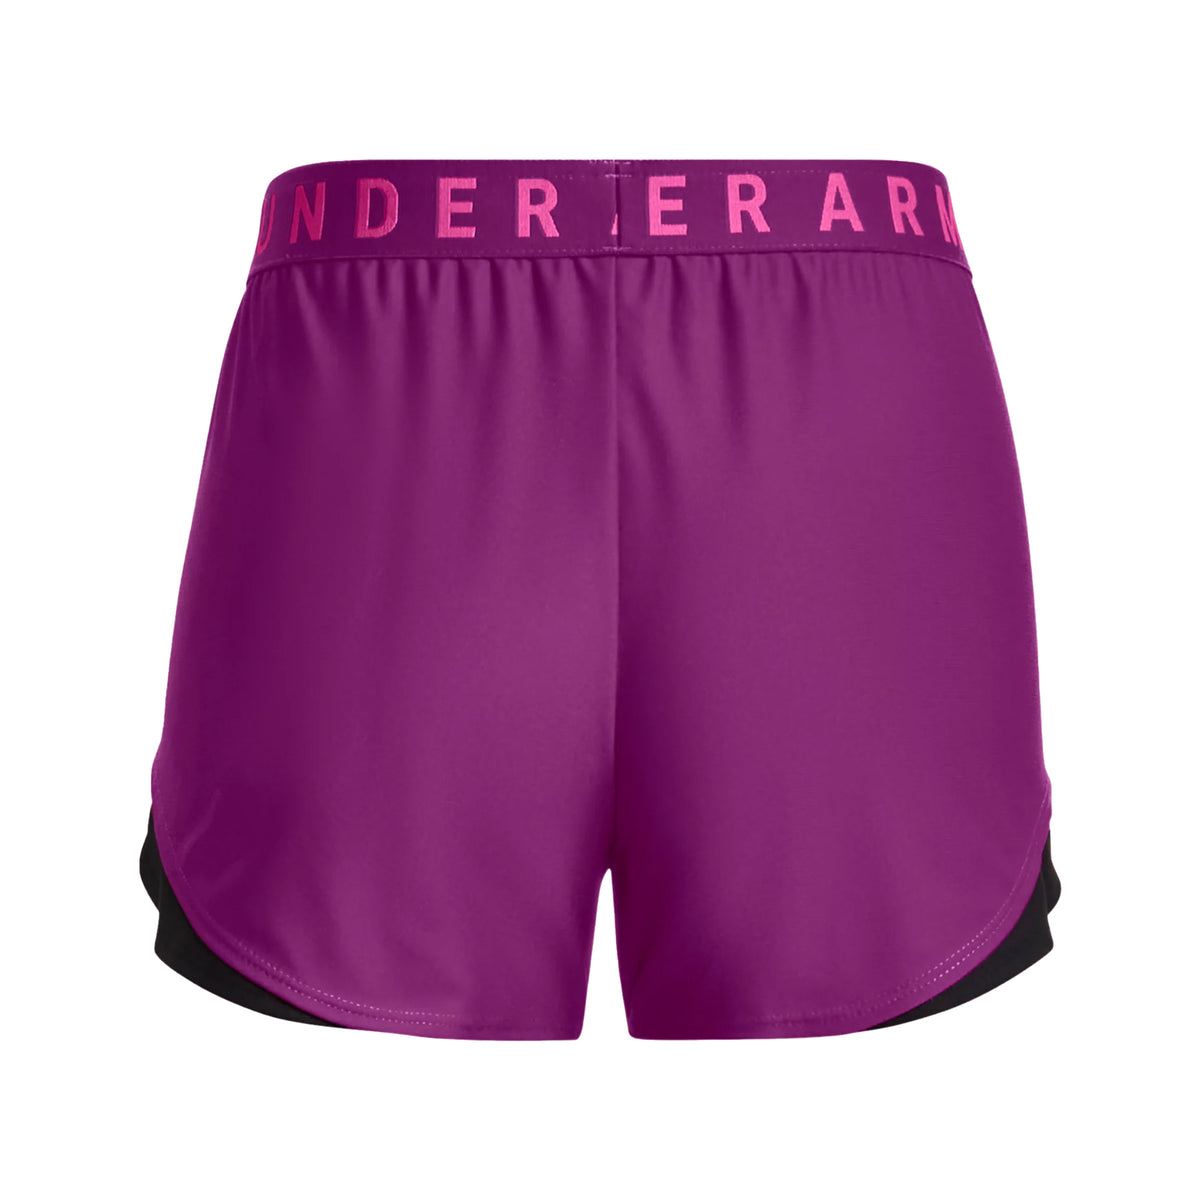 Under Armour Womens Play Up Shorts 3.0: Mystic Magenta/Black